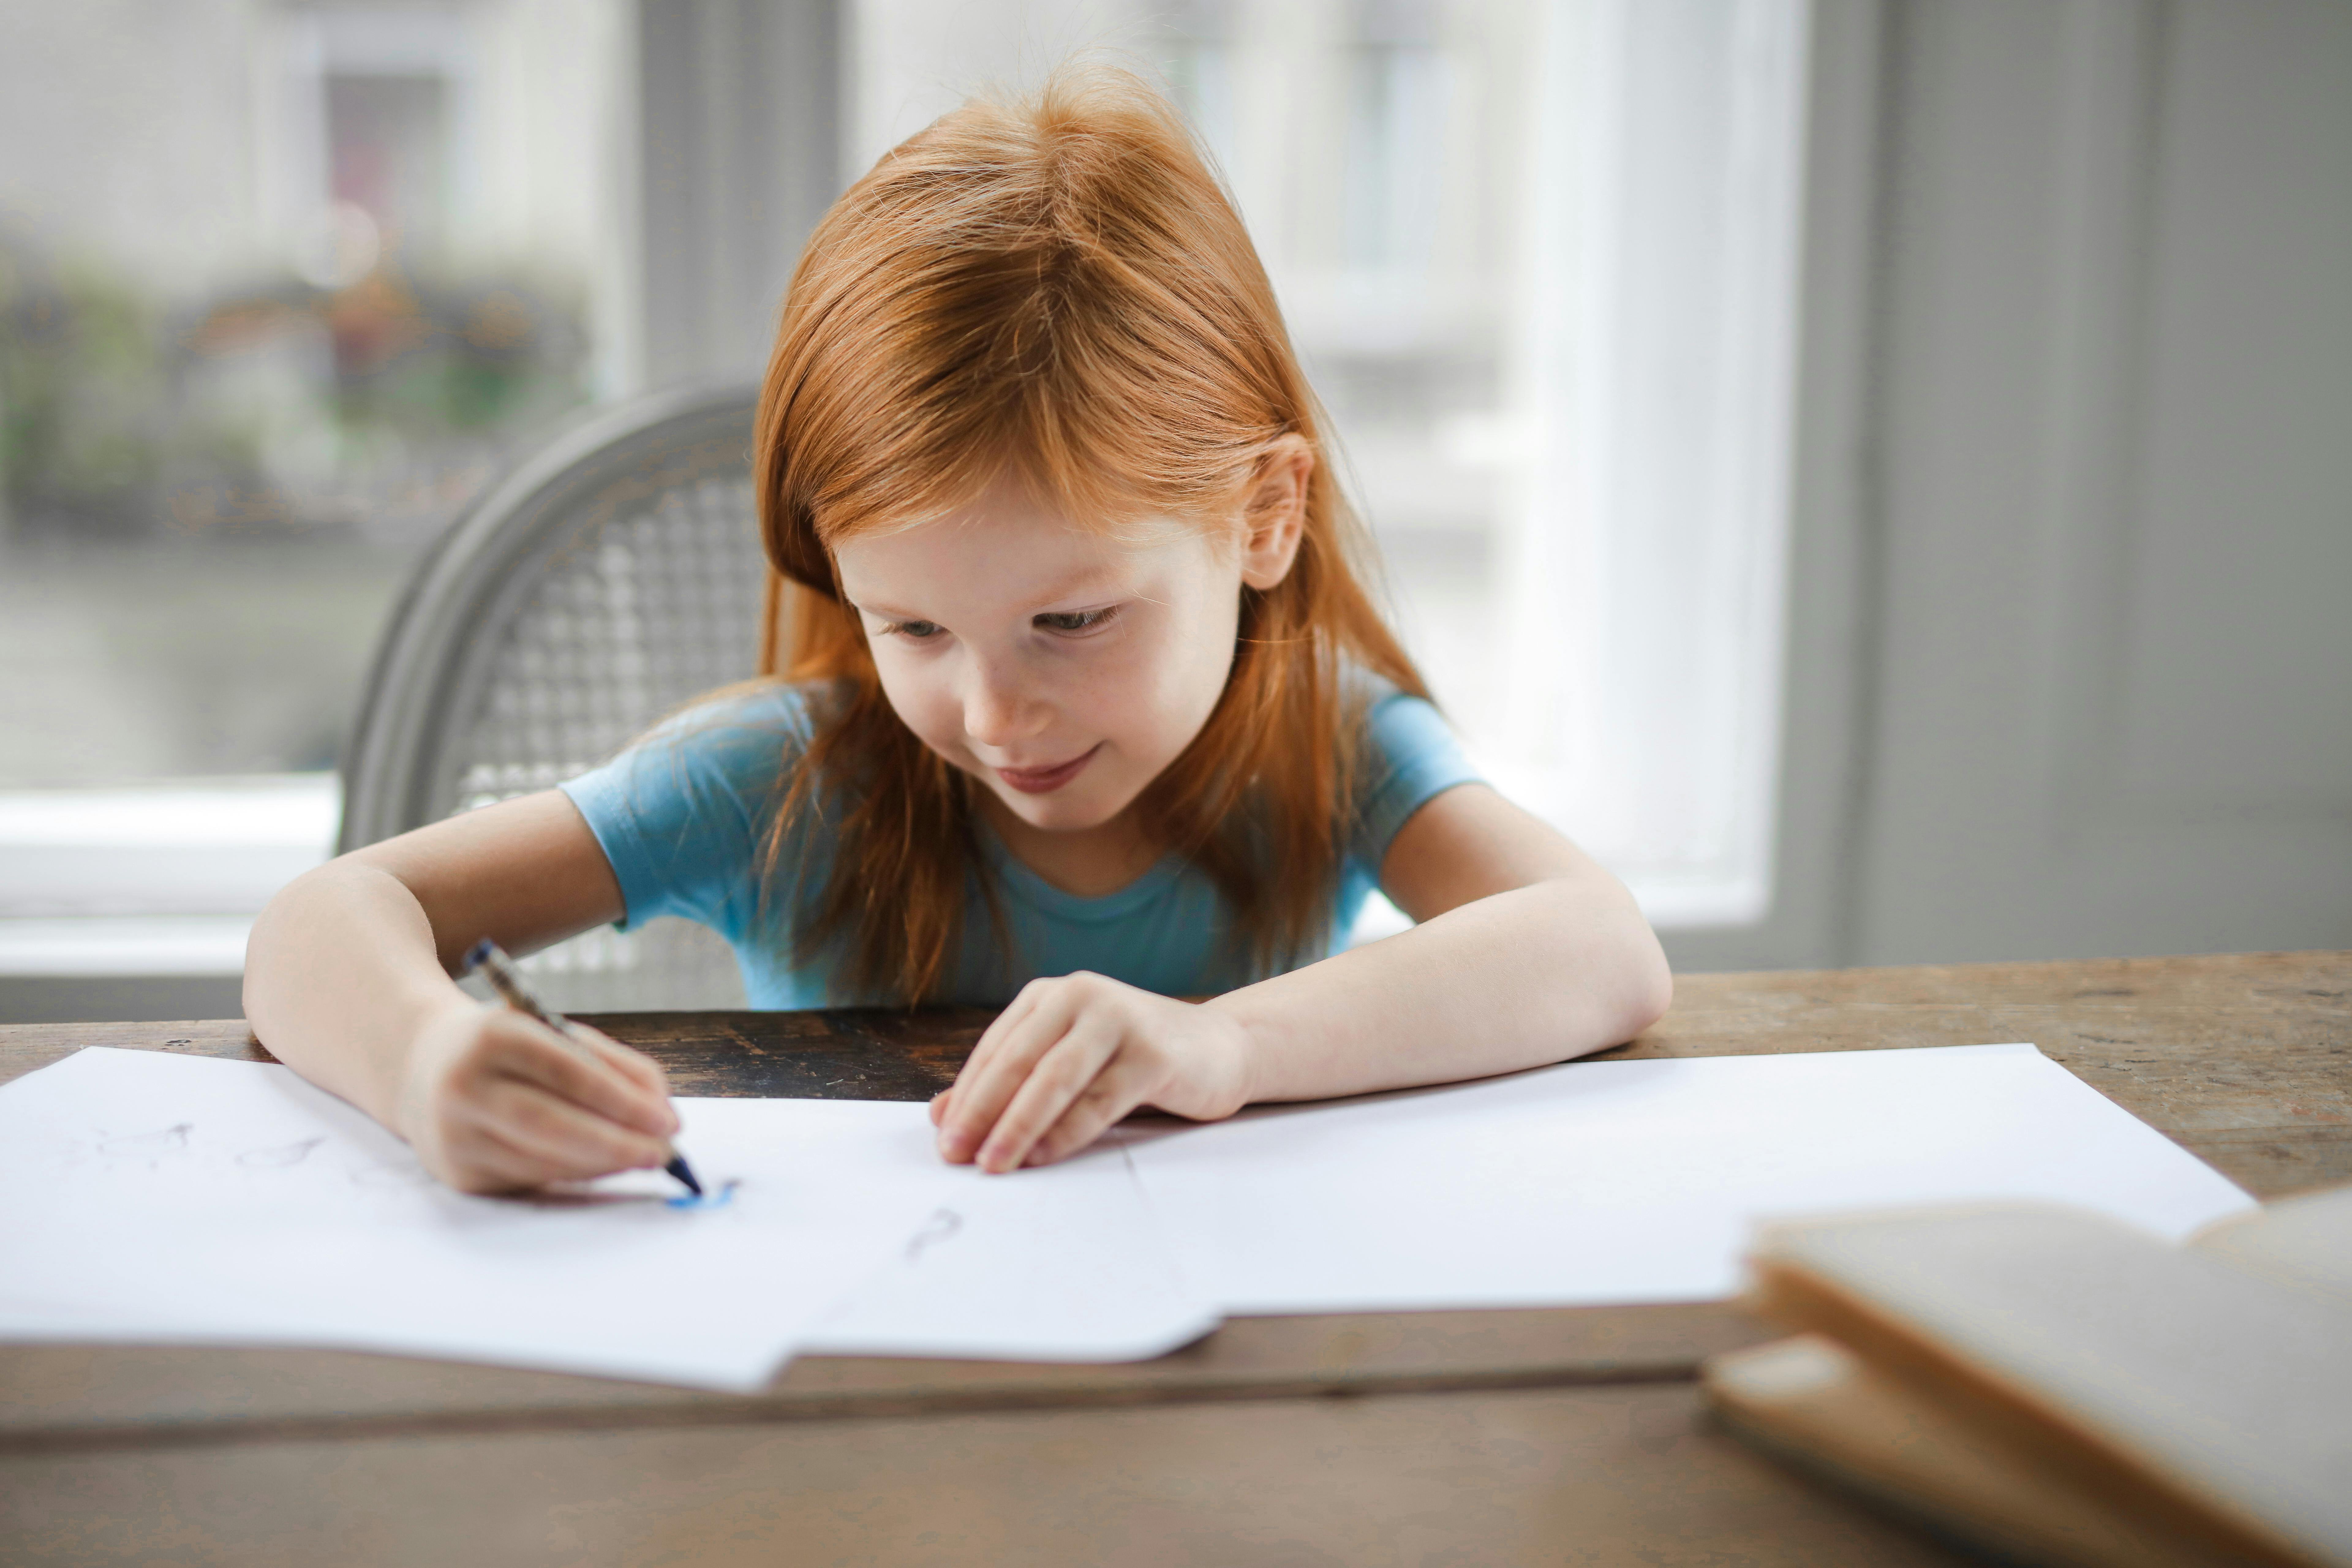 Little girl drawing | Source: Pexels